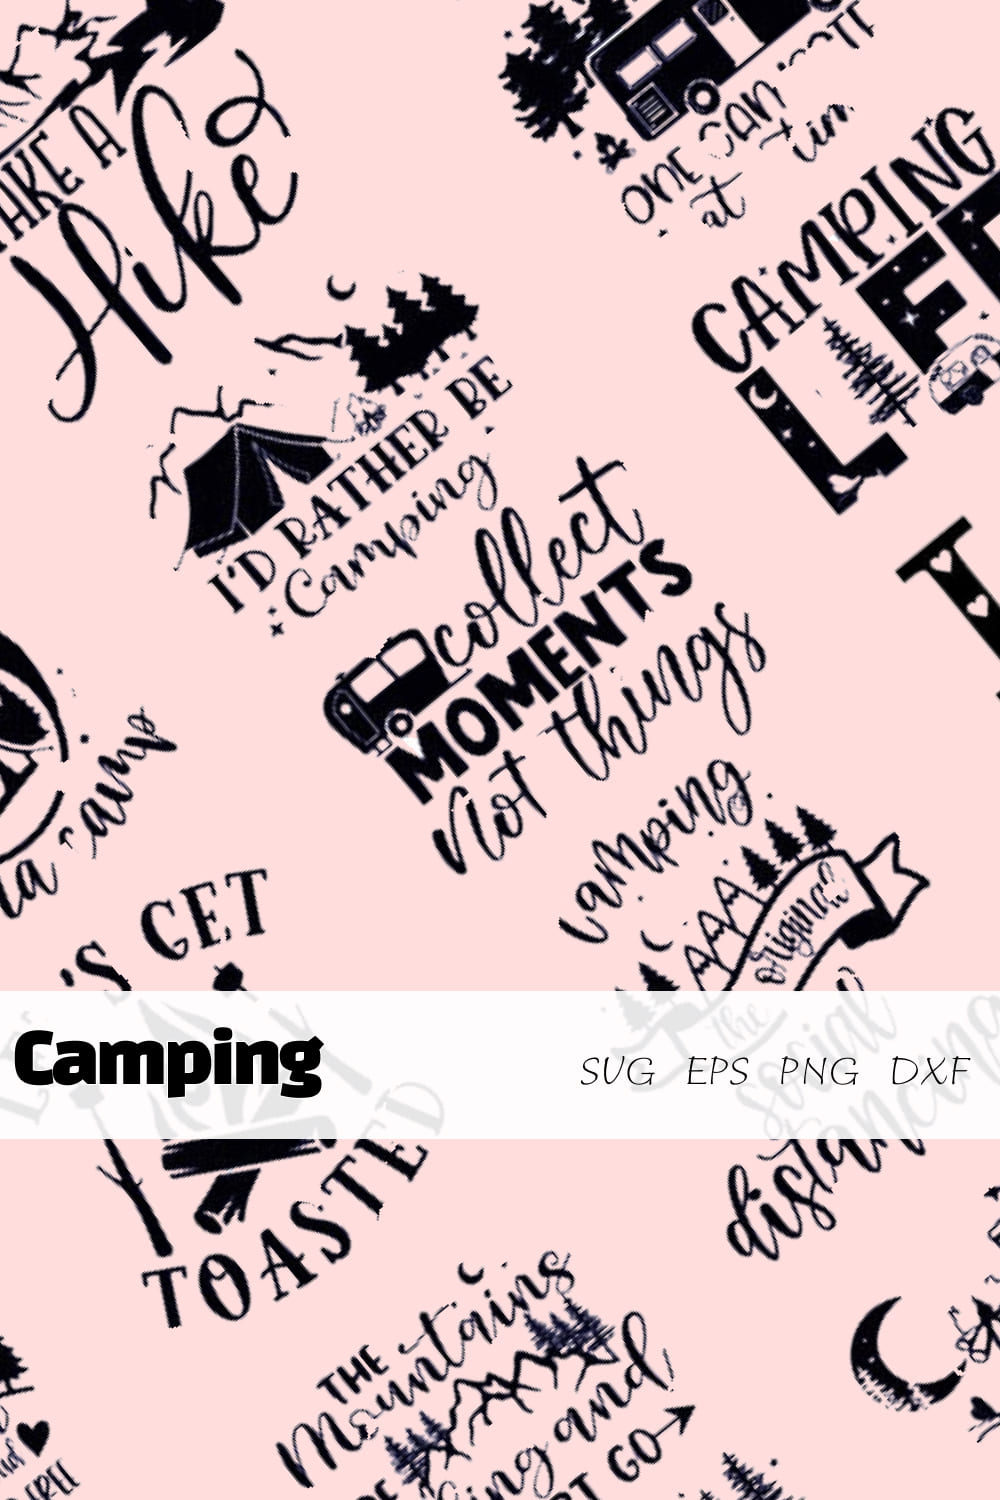 Camping Quotes SVG - preview image.